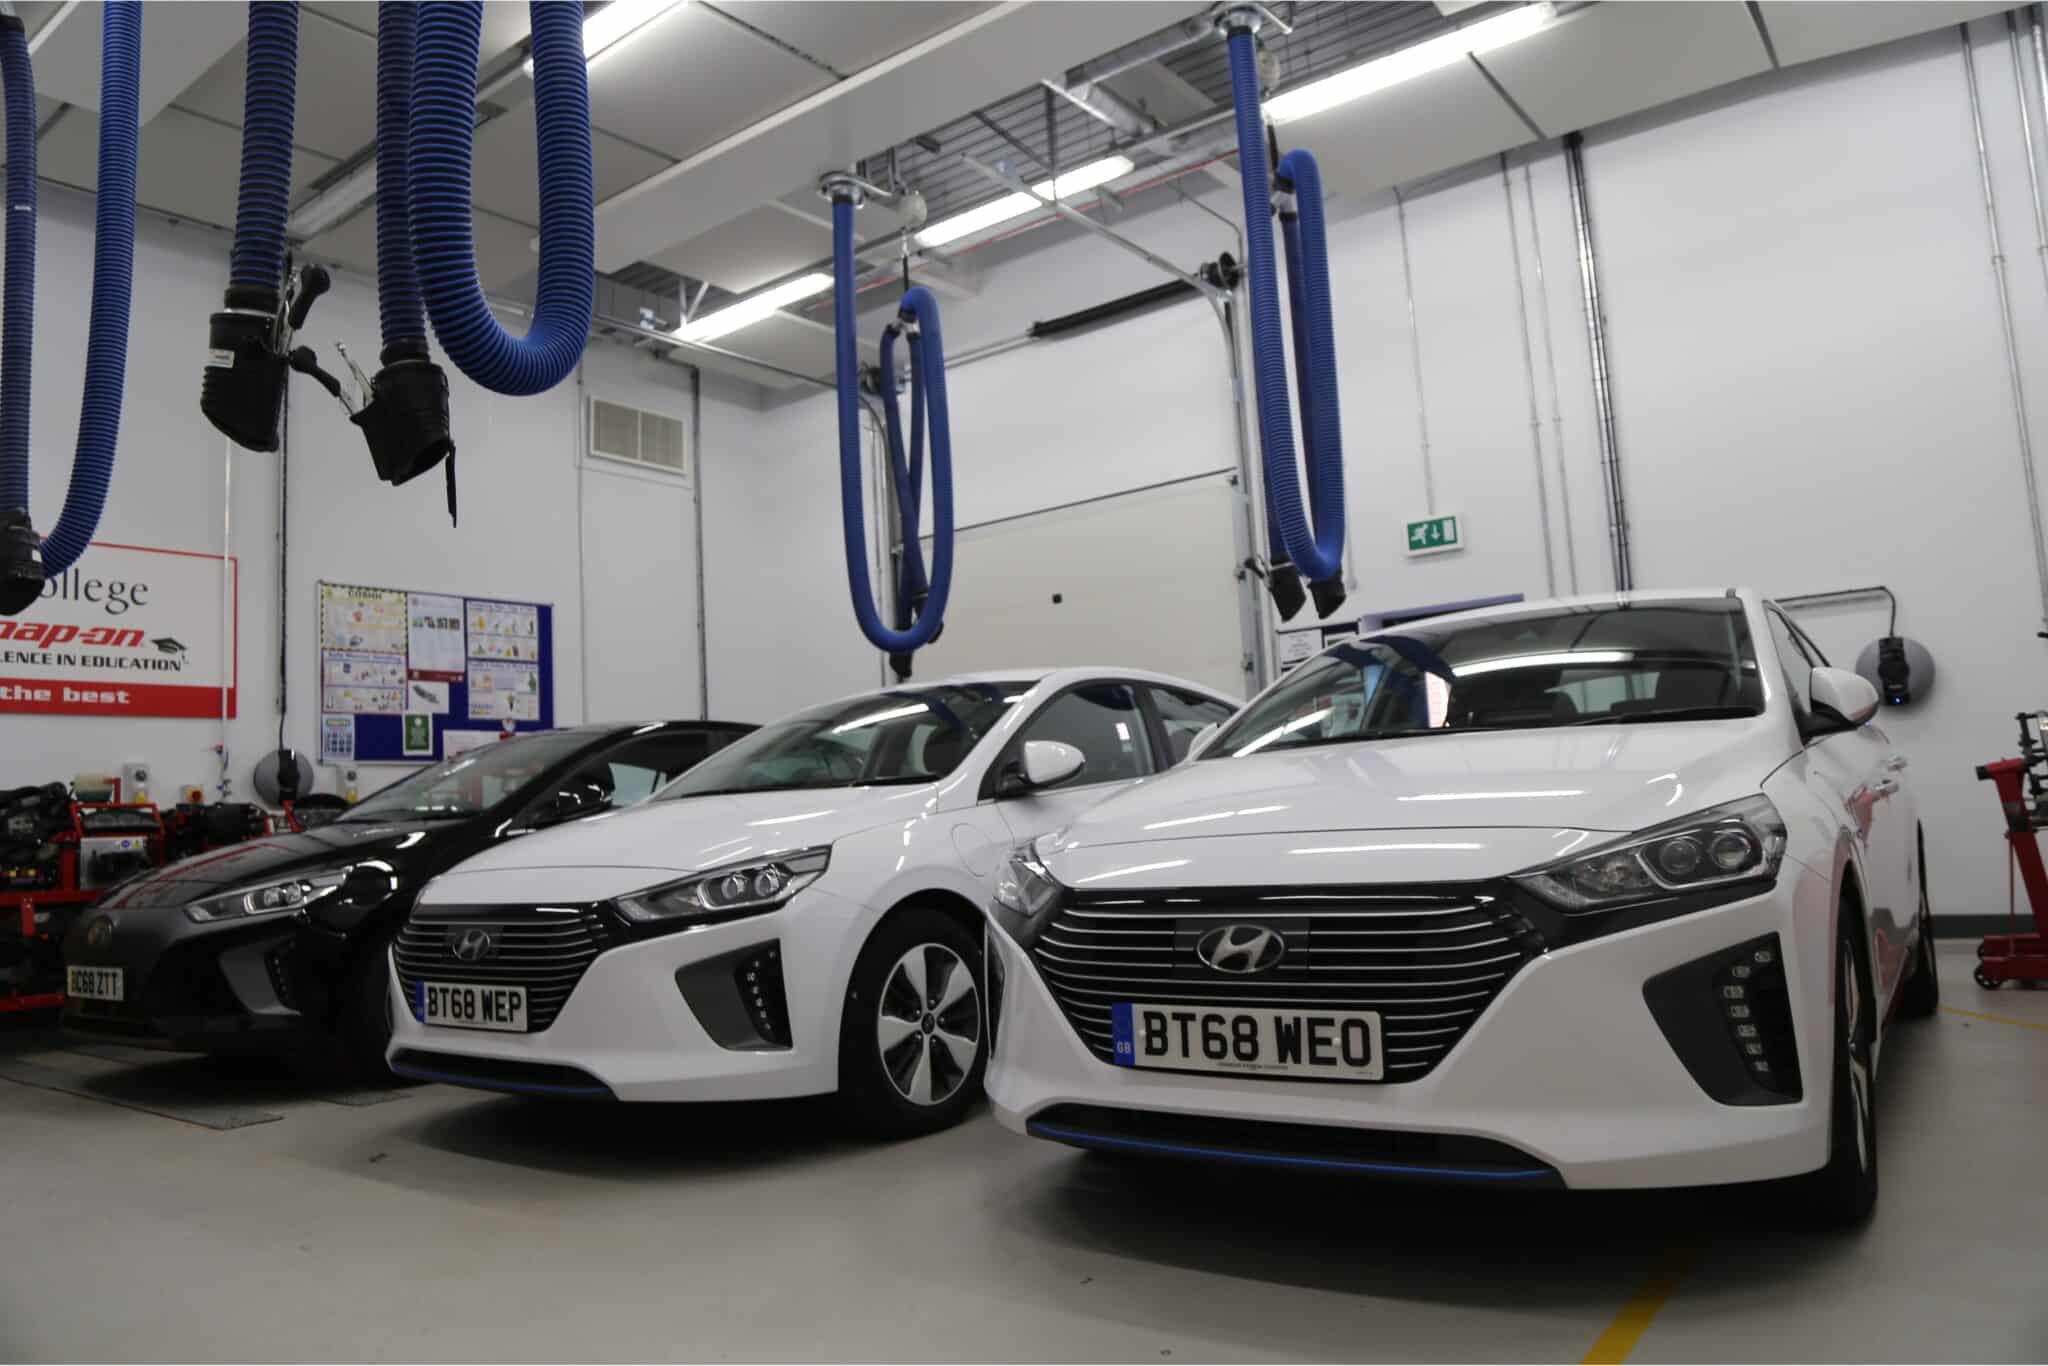 Motor Vehicle courses seal industry approval